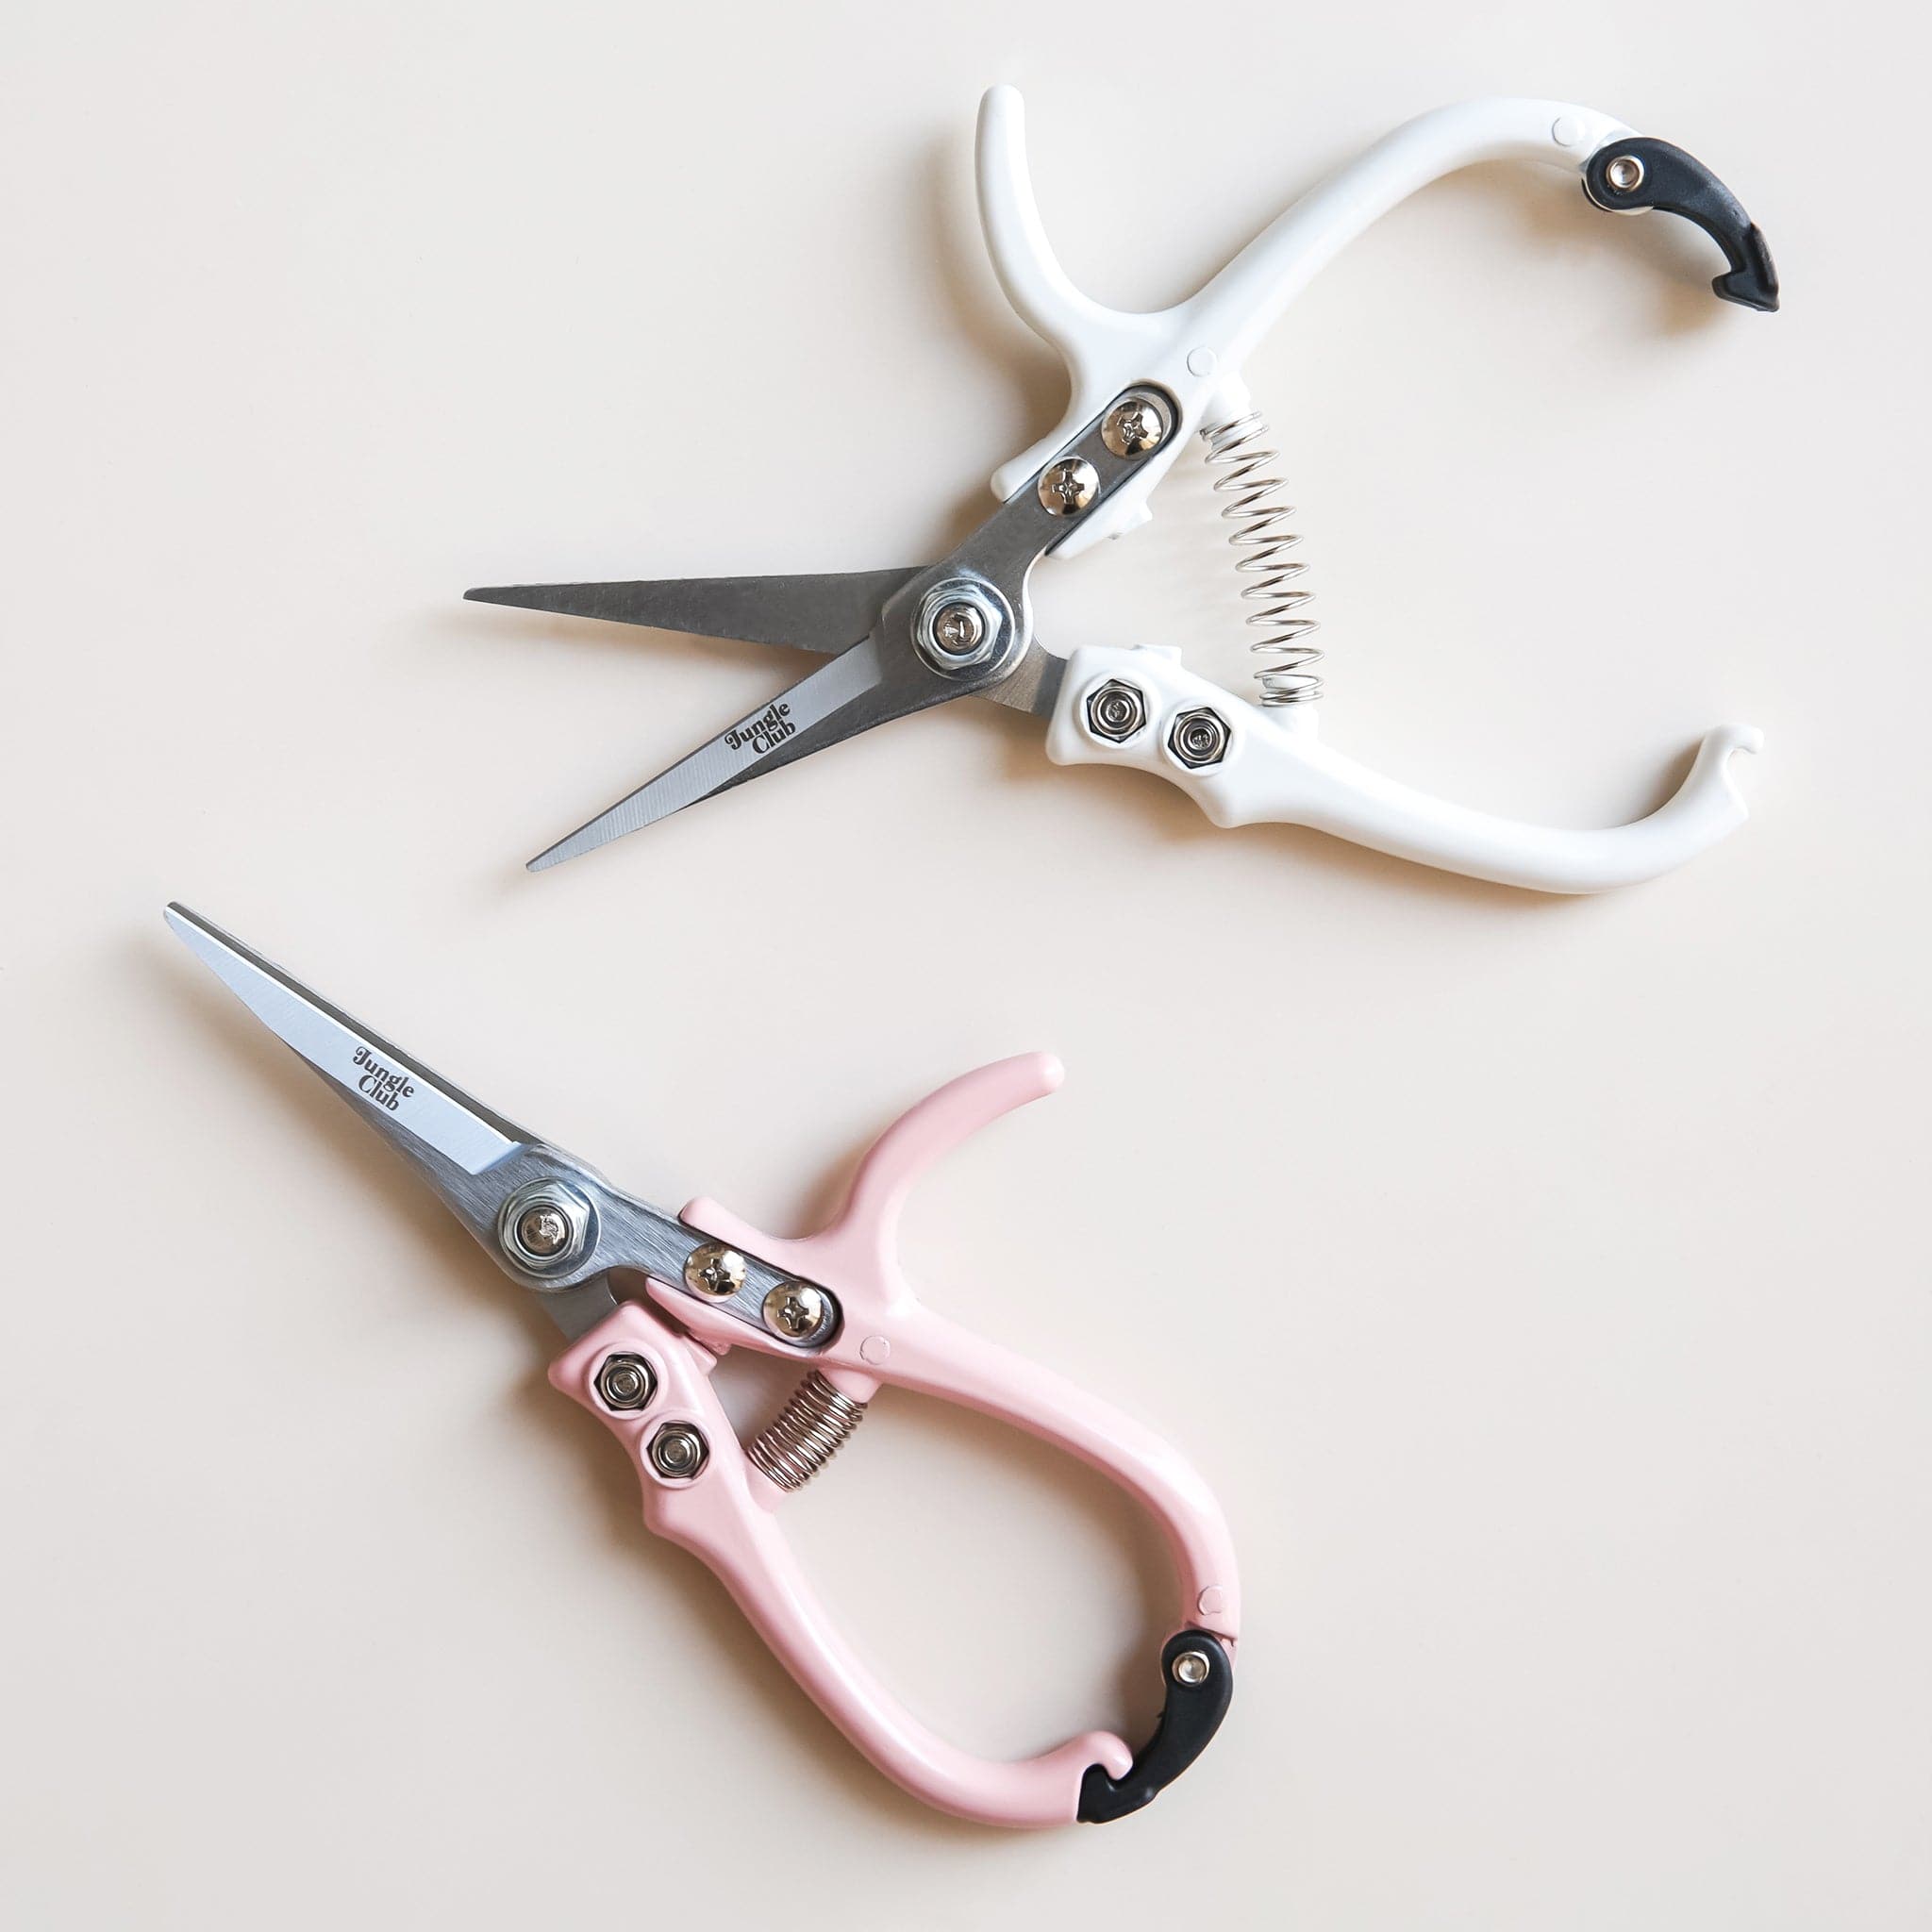 Two pairs of pruning shears laying next to each other. The pair towards the bottom is fasten closed with pastel pink handles and the pair above is positioned unclasped with white handles. 